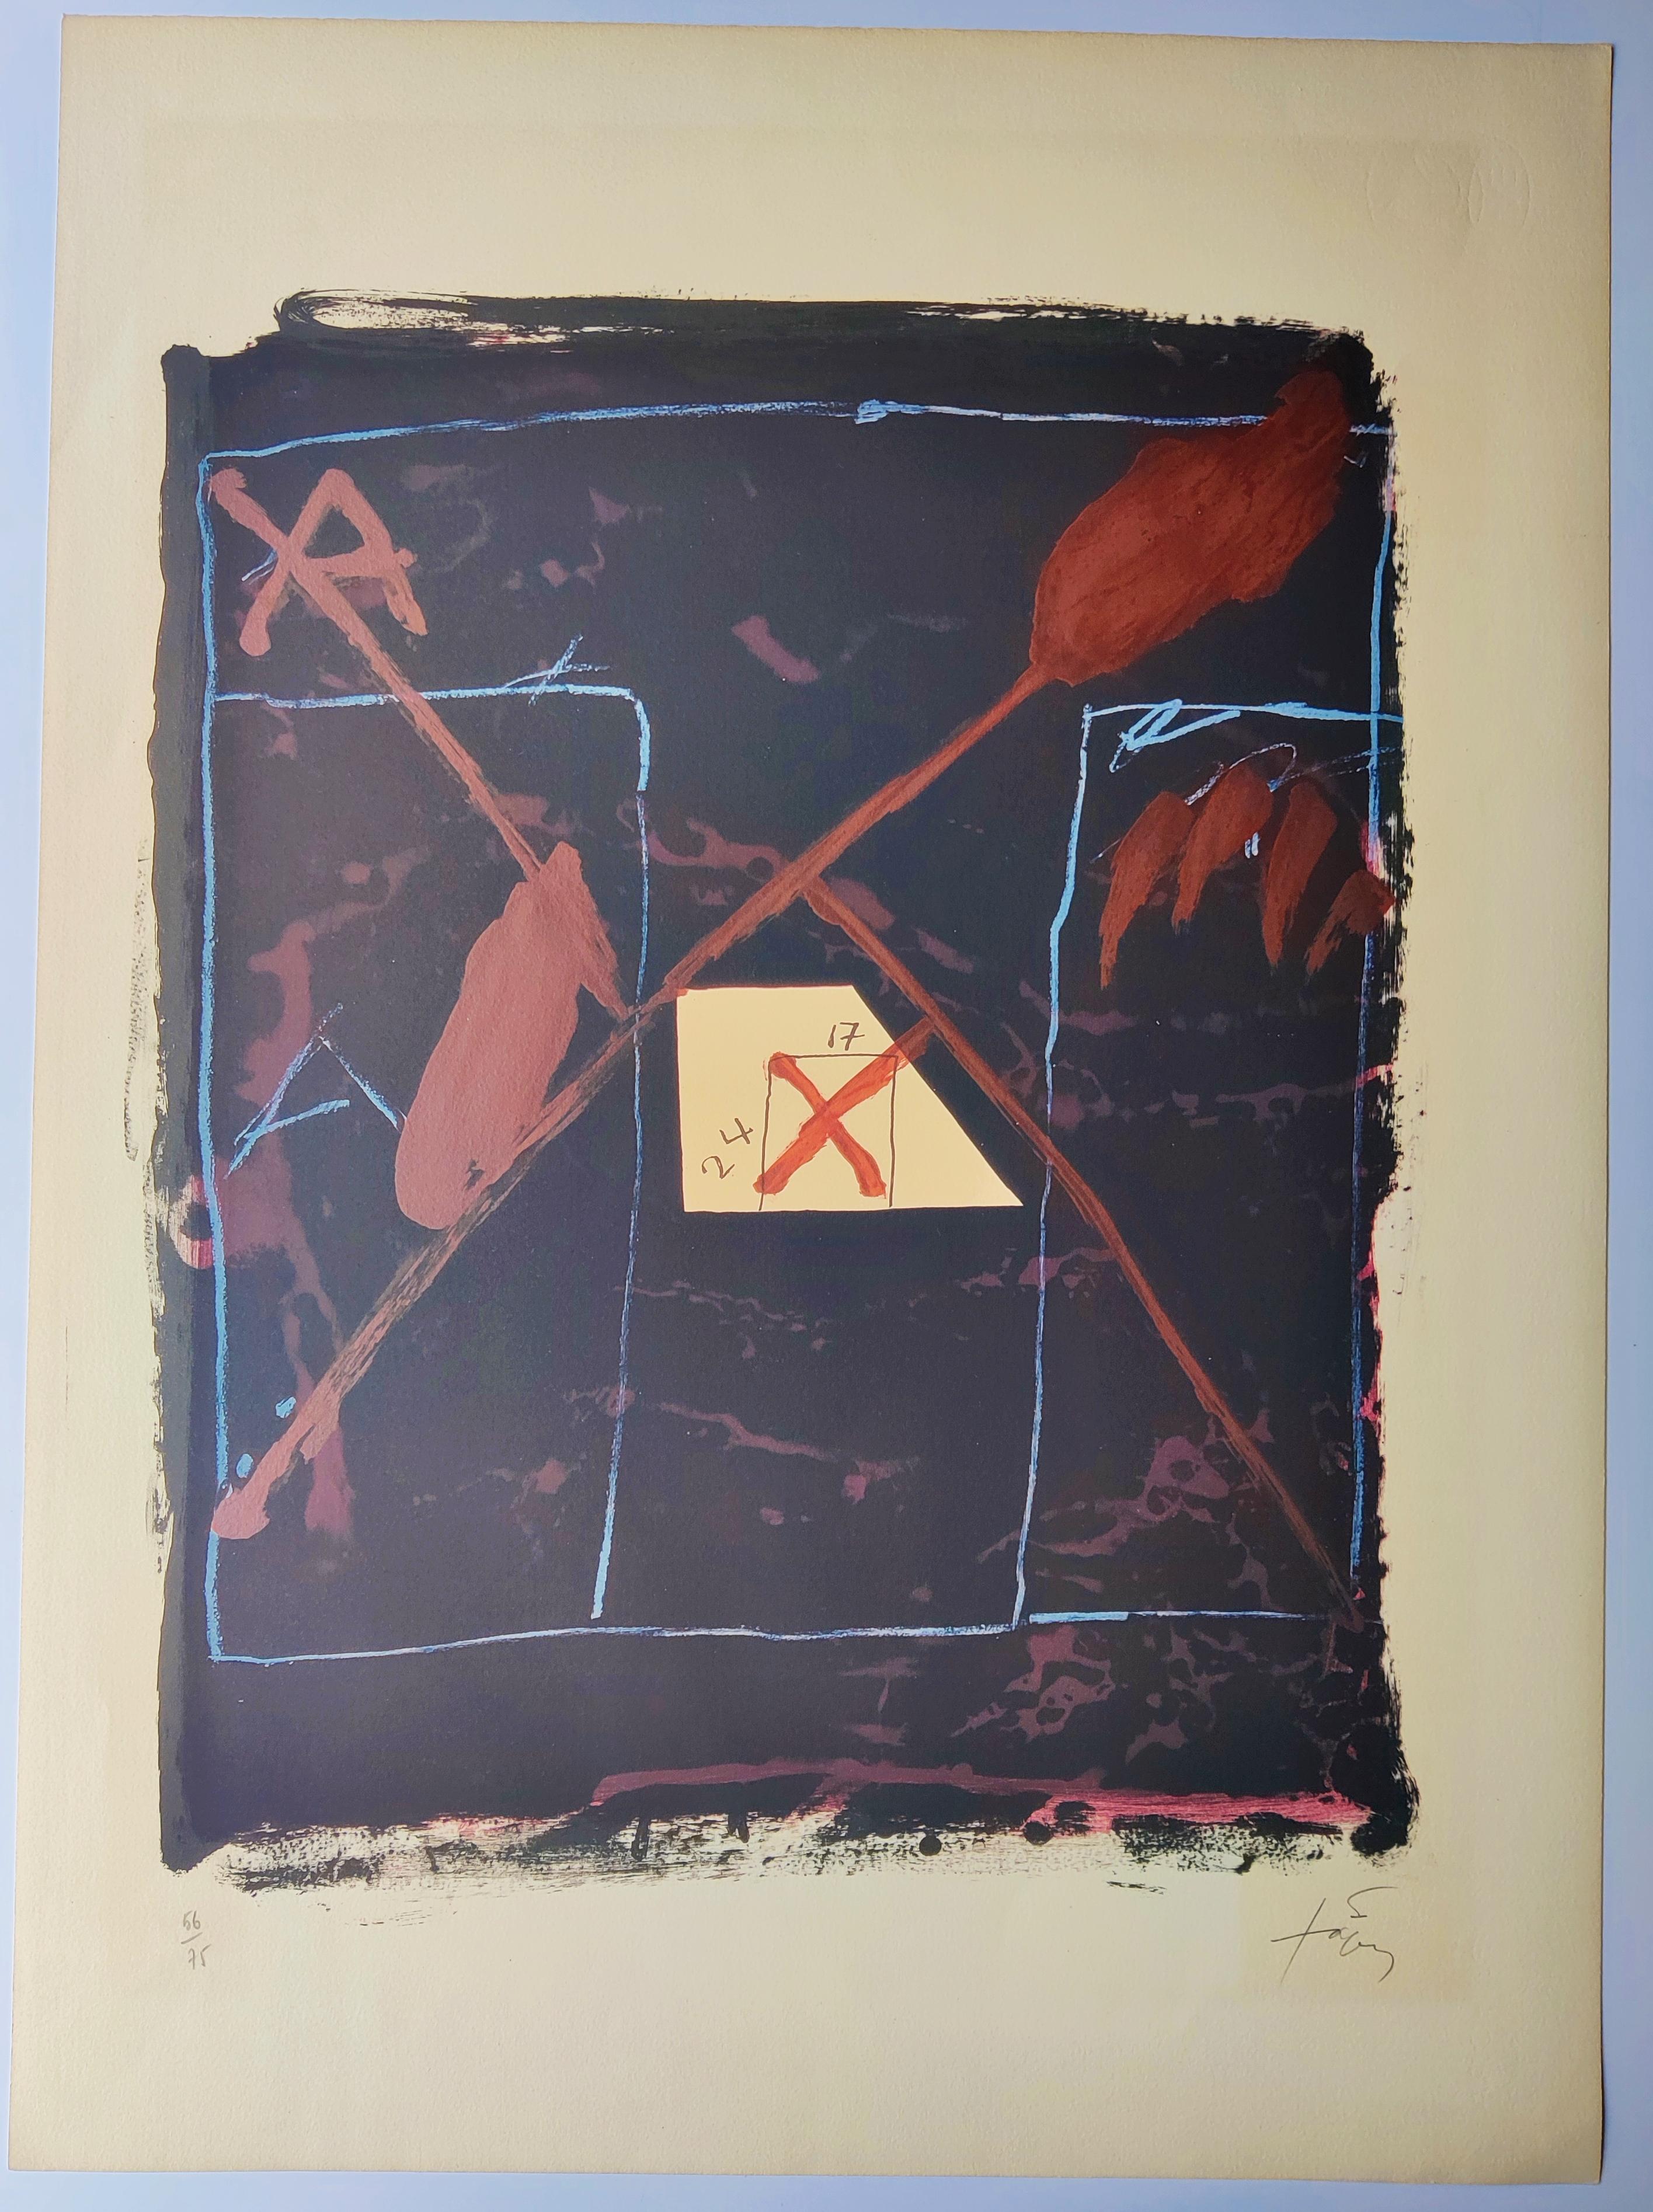 Antoni TAPIES 
24 sur 17, 1976
Lithographic 
Edition 56/75 lower left
Signed lower right
Sheet 76 X 55.5 cm
Literature: Galfetti 624